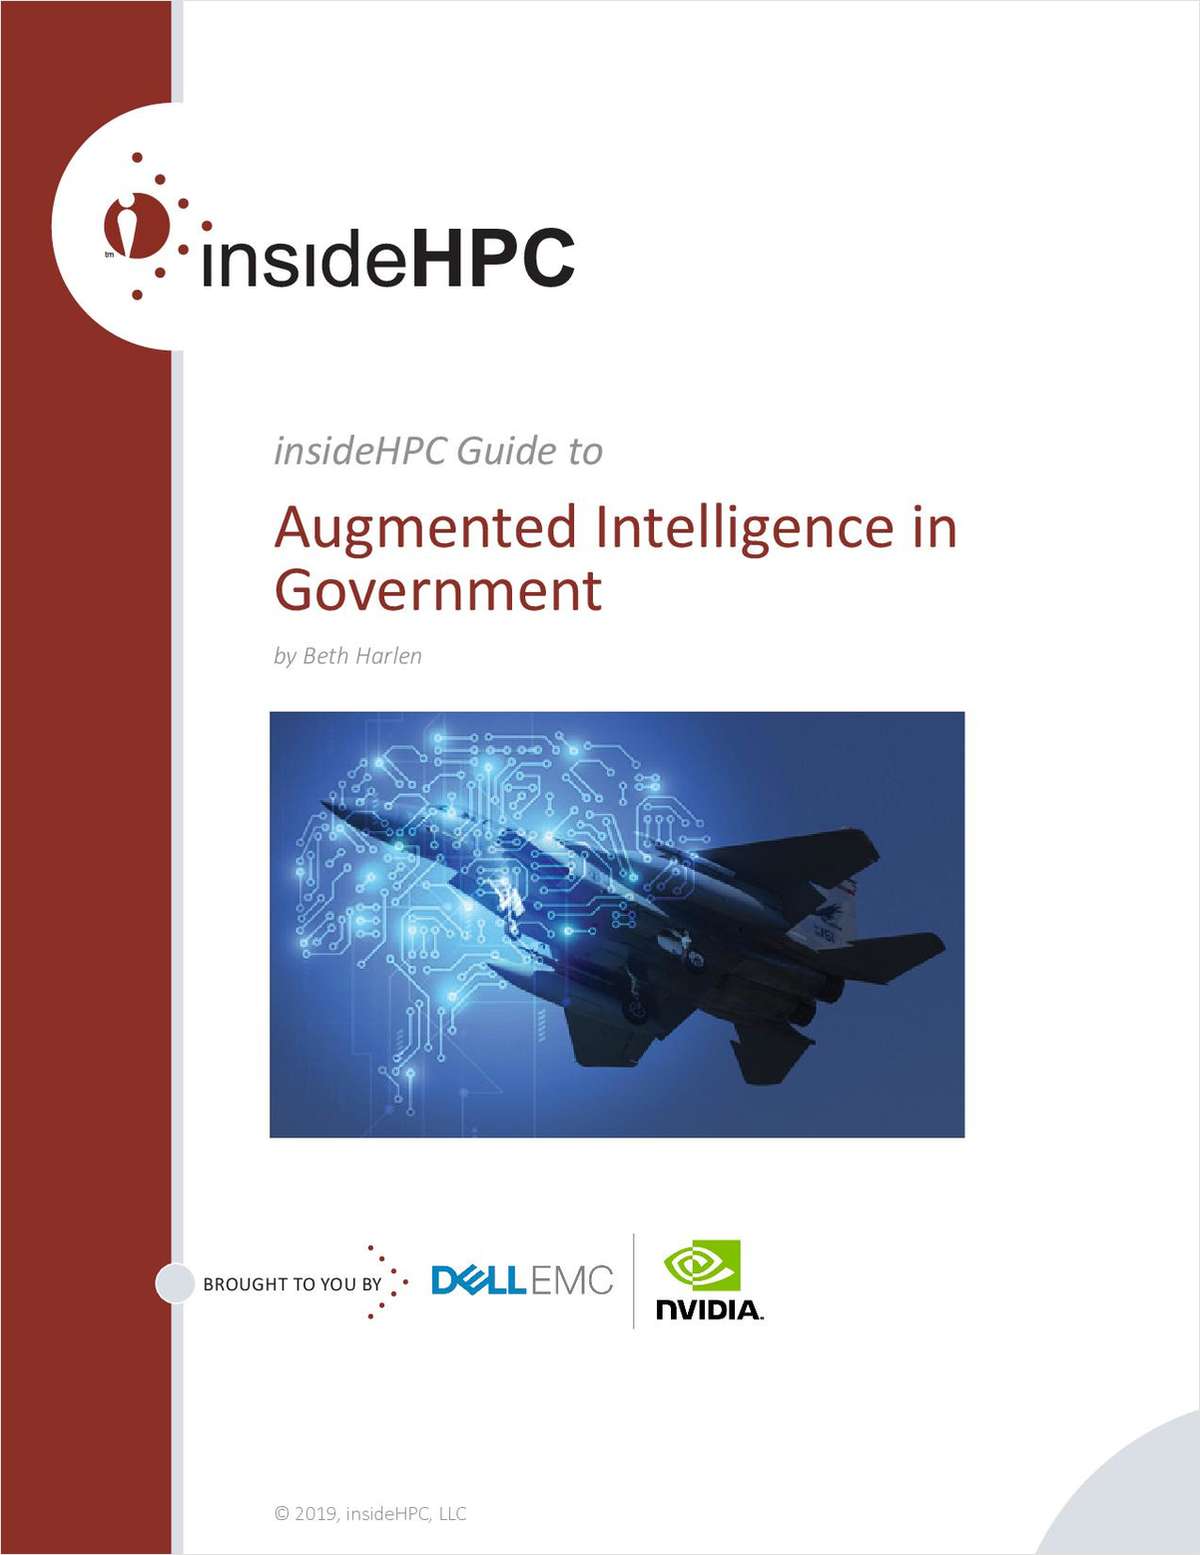 An insideHPC Guide: Augmented Intelligence in Government